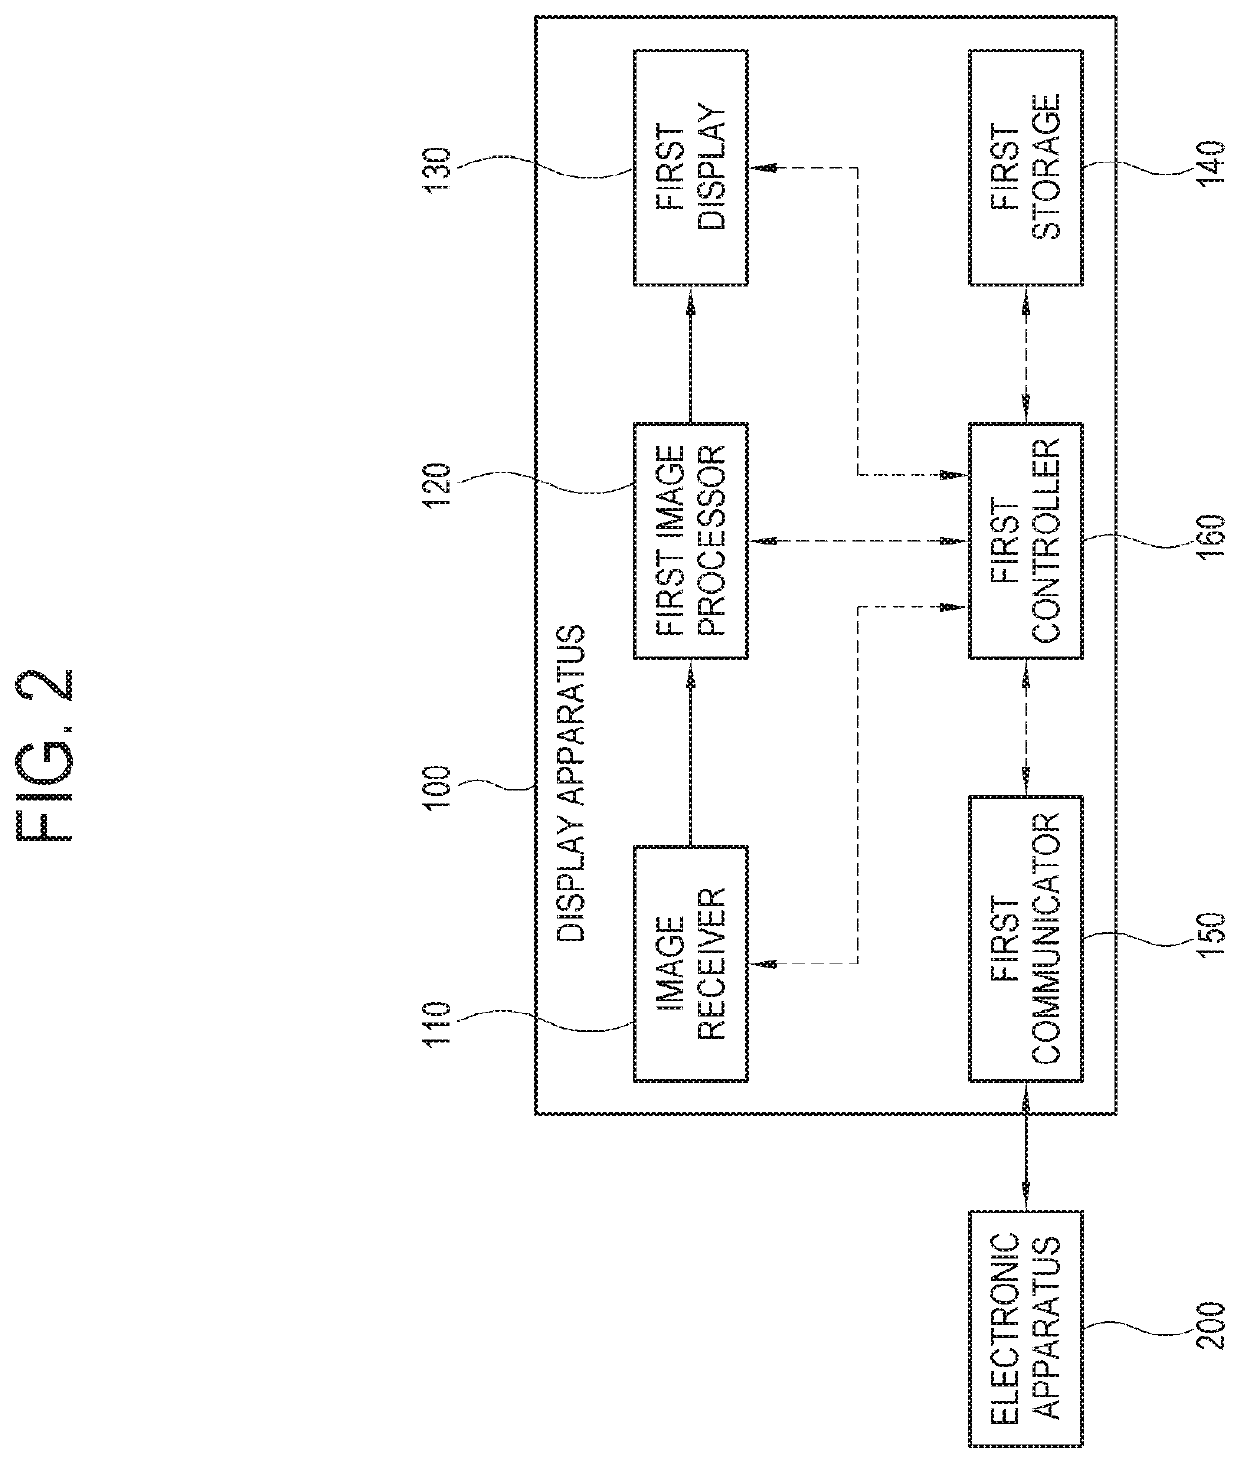 Controlling a display apparatus using a virtual UI provided by an electronic apparatus